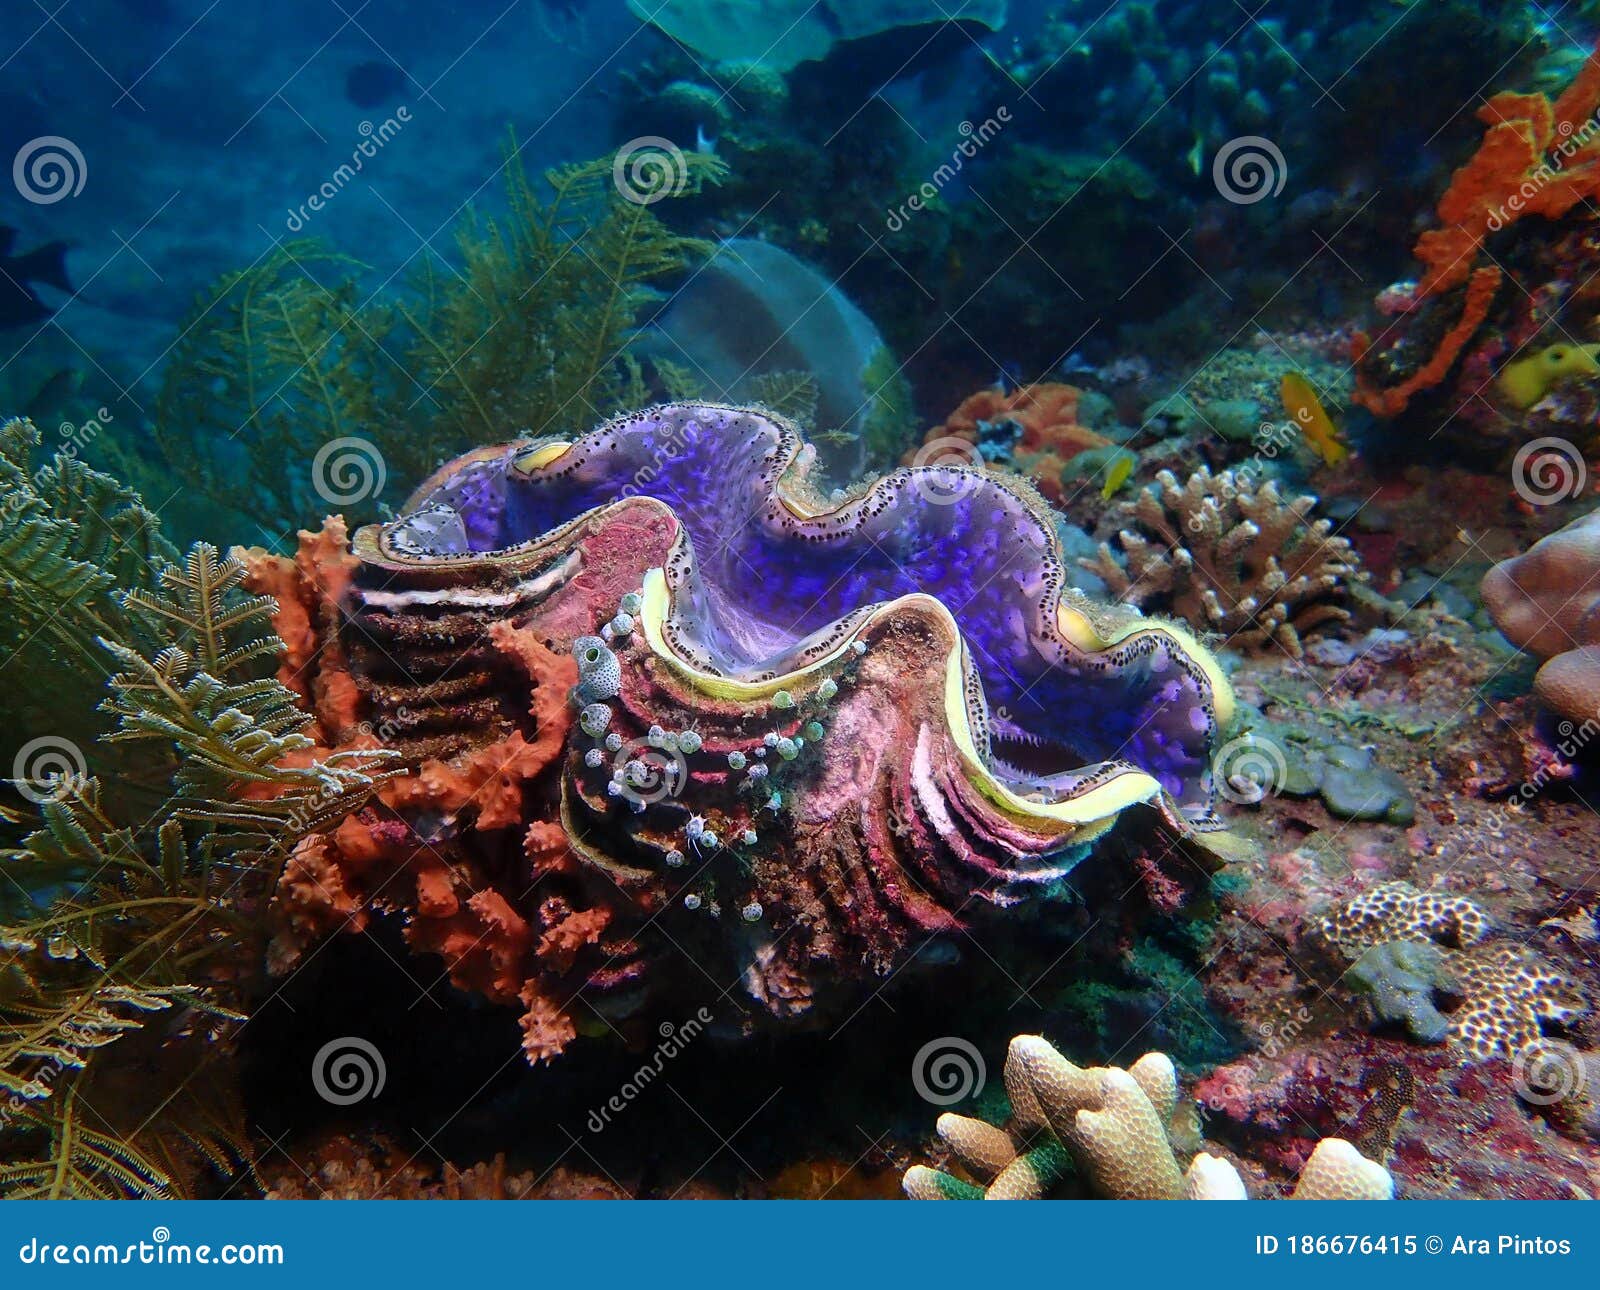 giant clam ( tridacna gigas ) in colorful reef coral